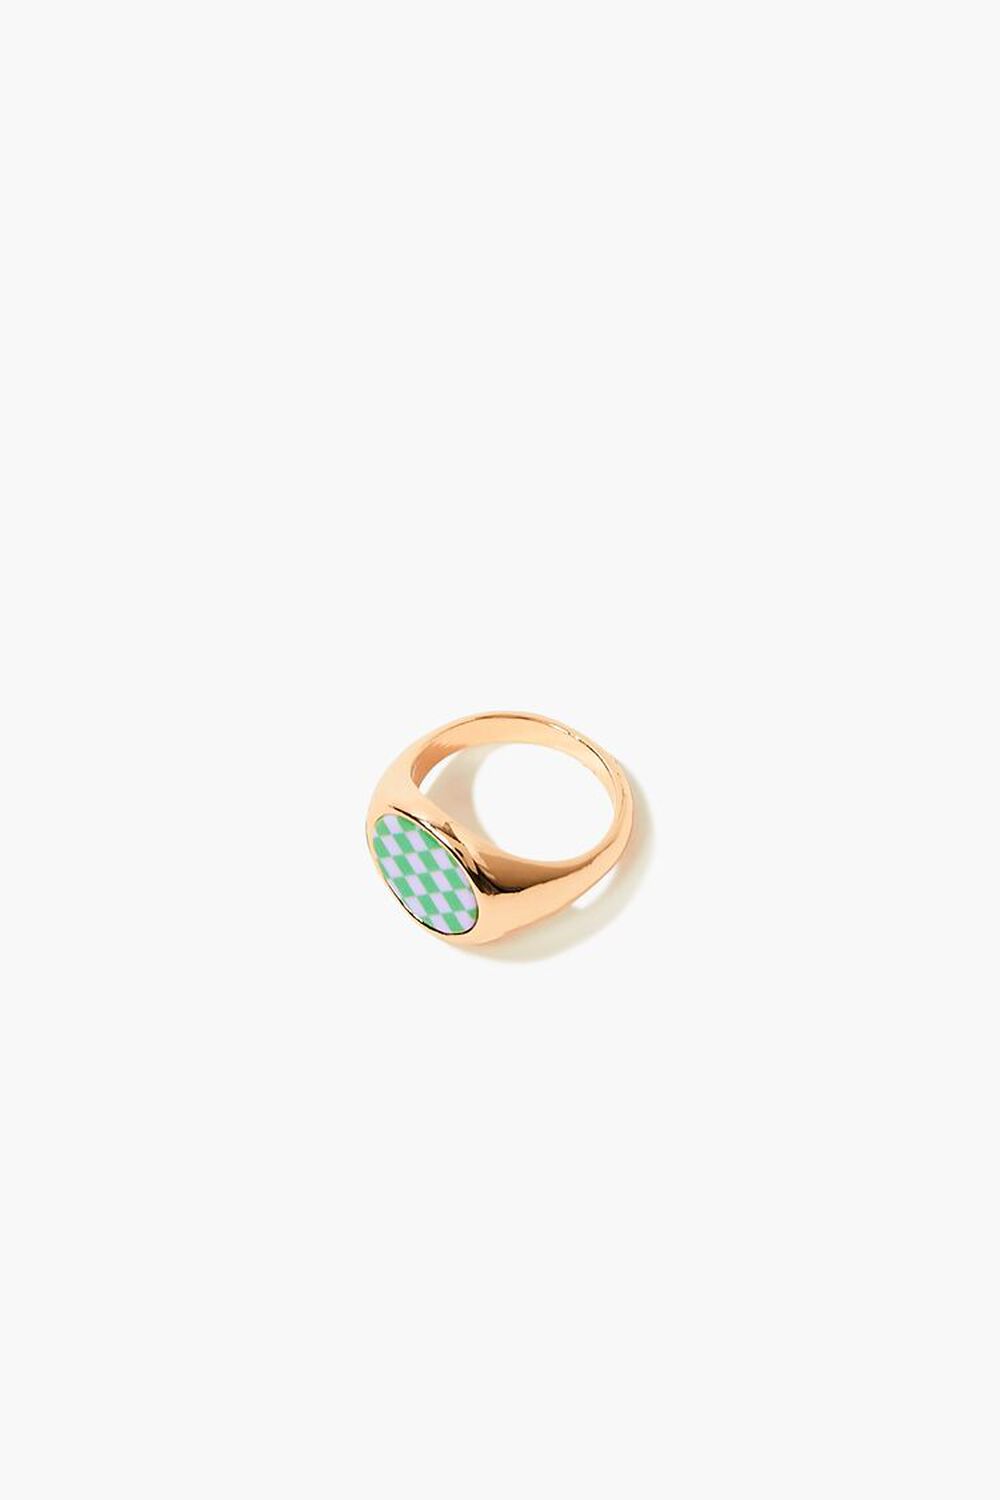 GOLD/GREEN Checkered Cocktail Ring, image 2